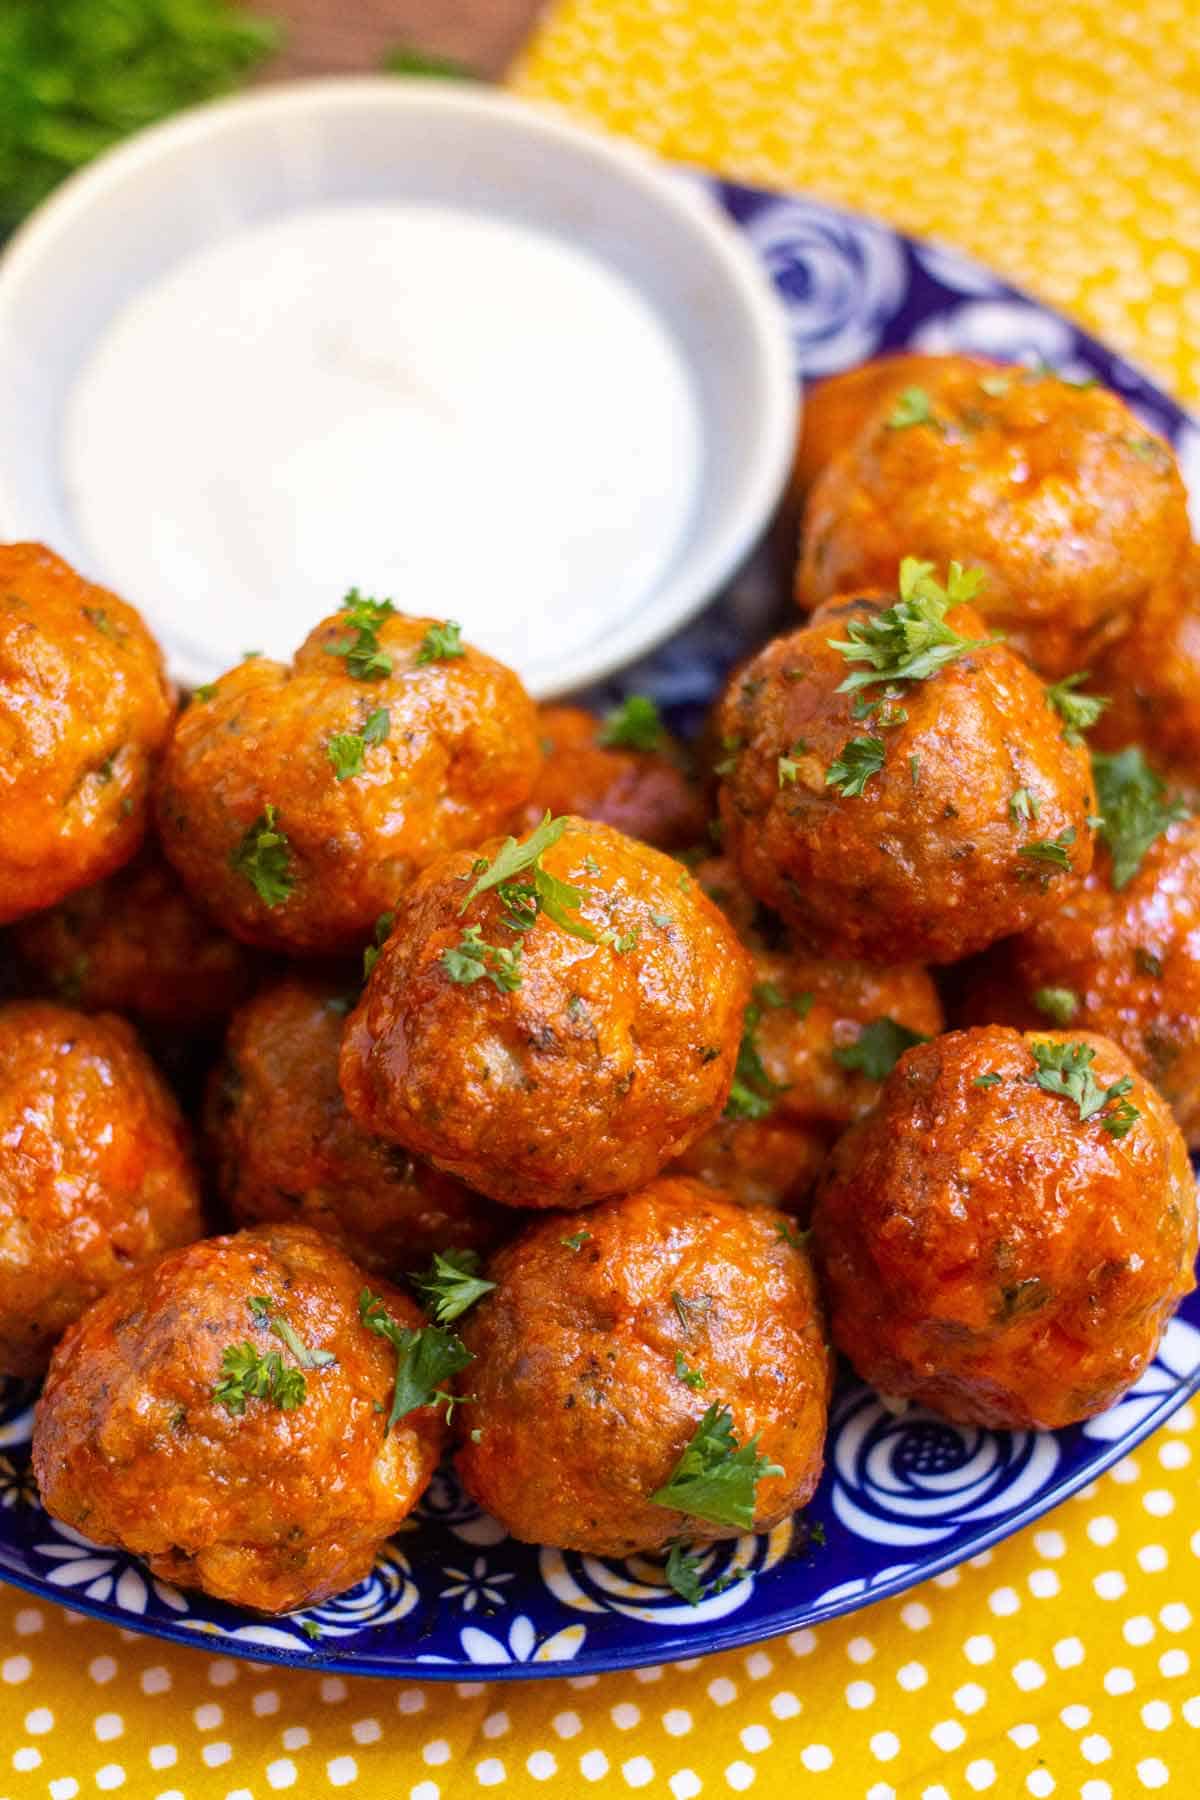 Buffalo turkey meatballs garnished with fresh parsley on a small plate with a small dish of ranch.